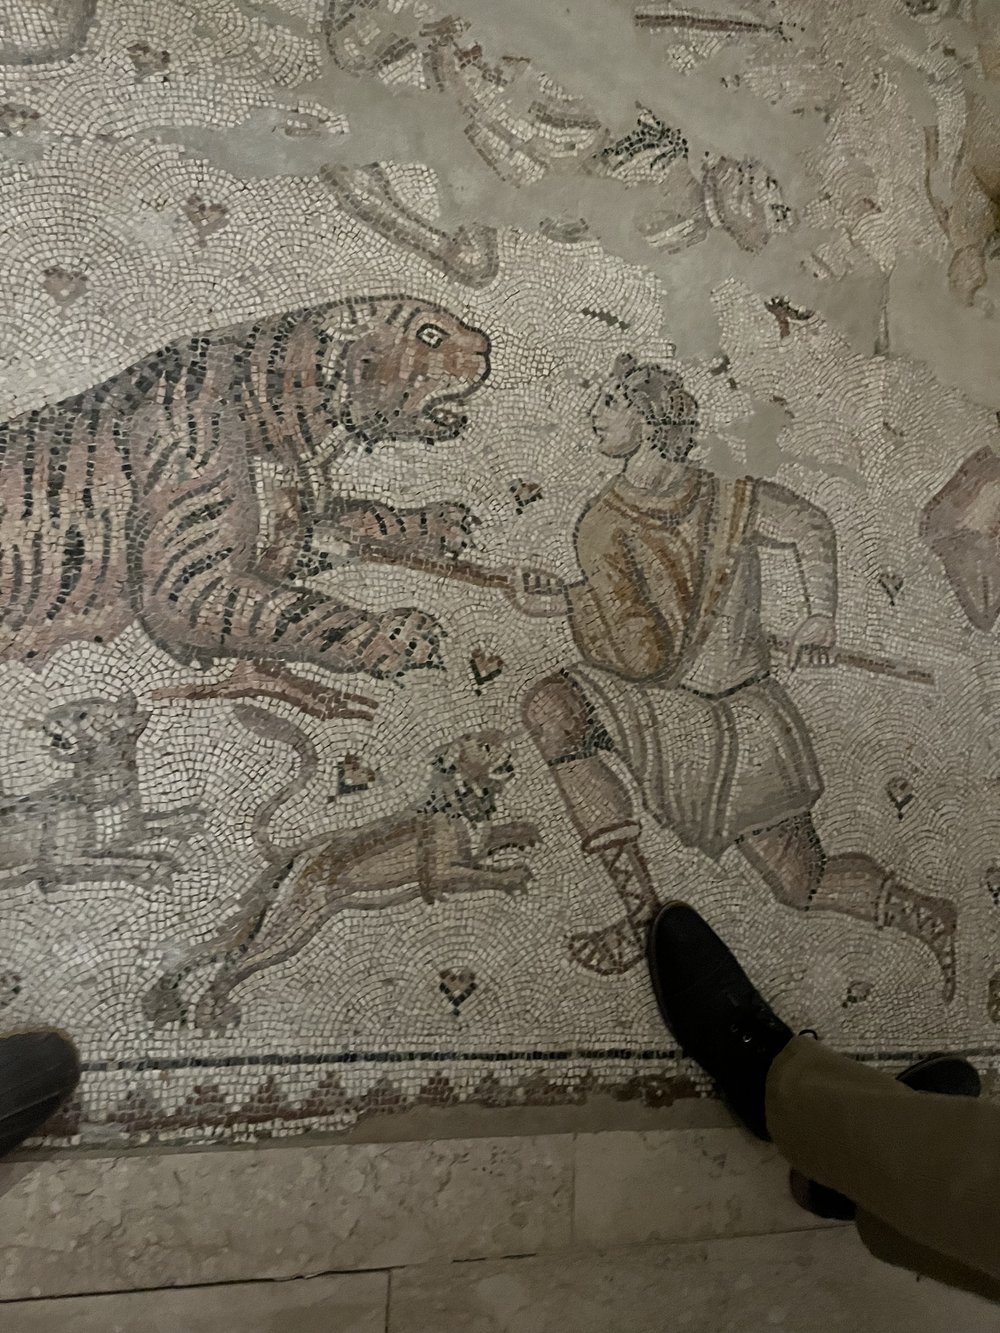 ARP.3 to DO_detail of hunt mosaic and mother tigress.jpg